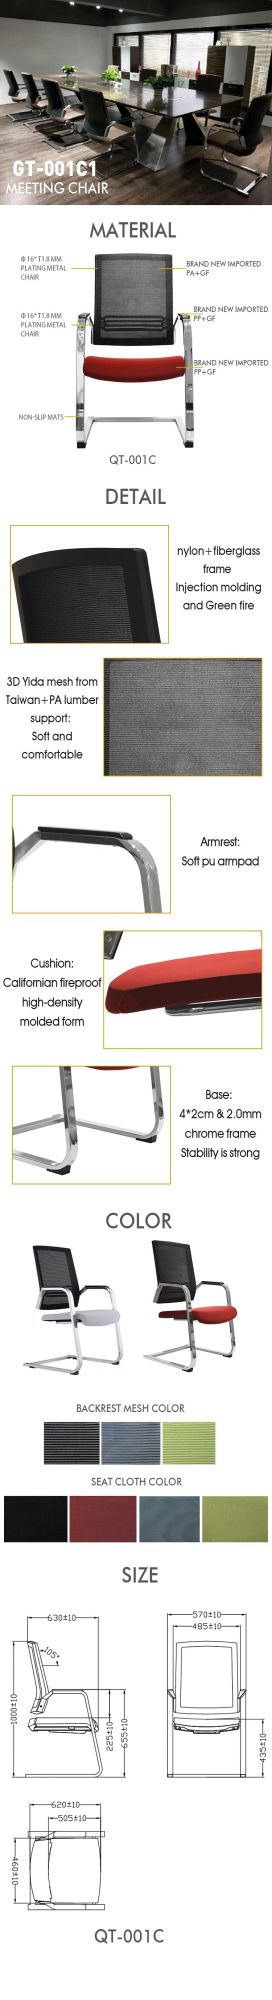 5 Years Modern Huy Stand Export Packing Office Furniture Chair